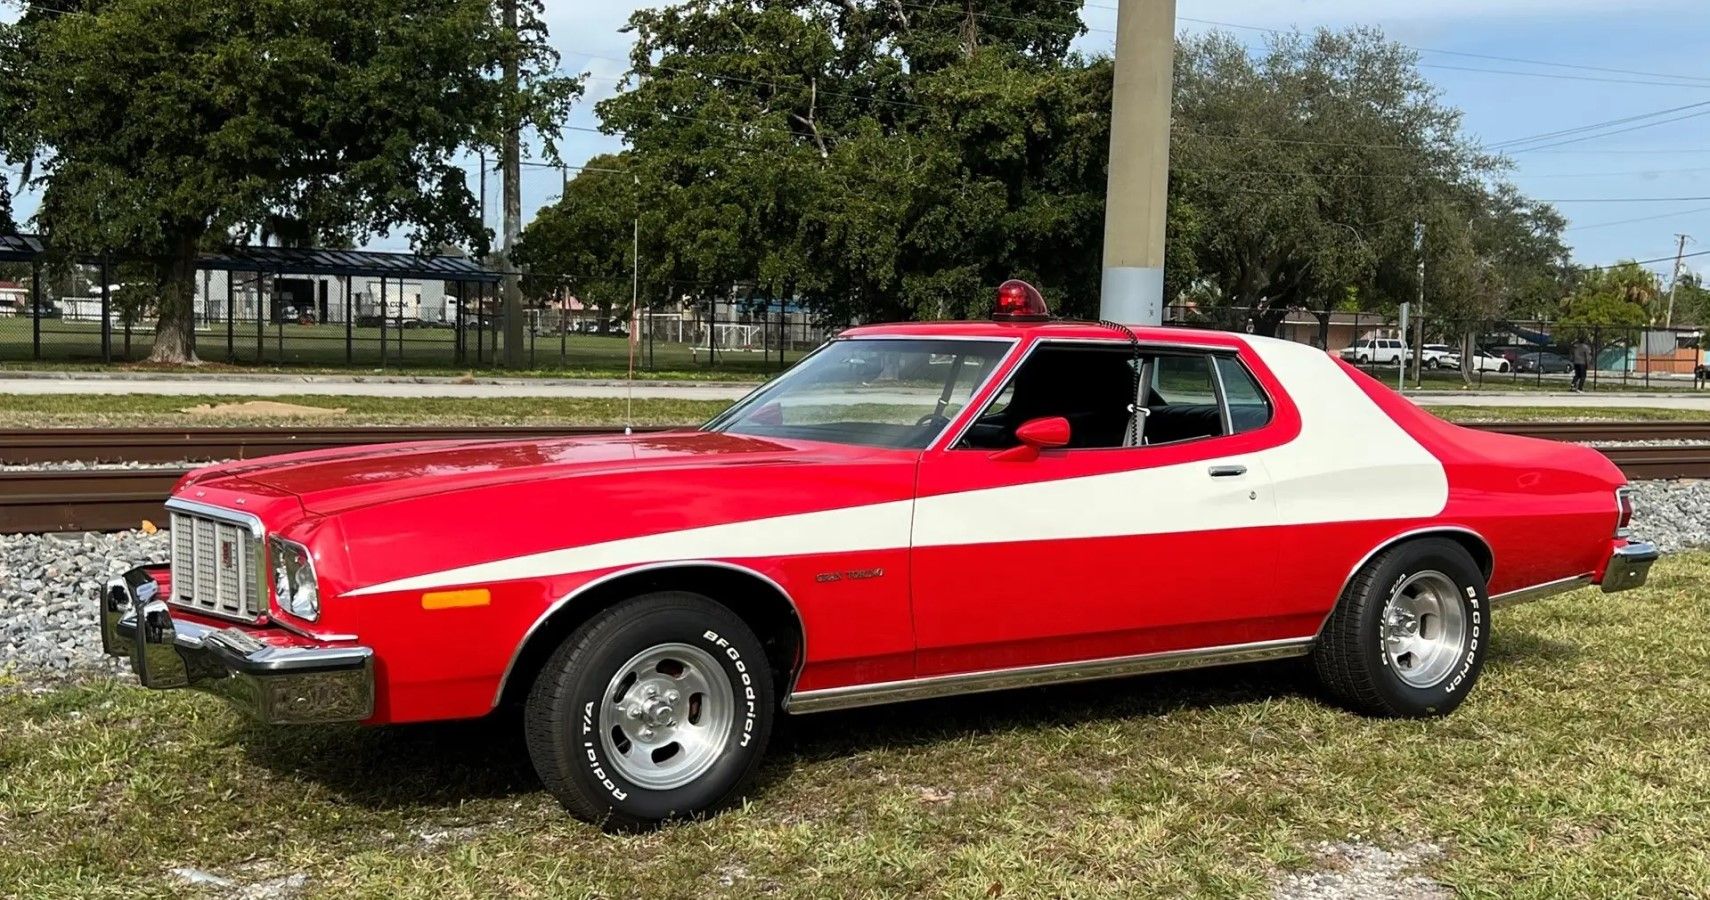 Here's Where The Ford Gran Torino From Starsky & Hutch Is Today